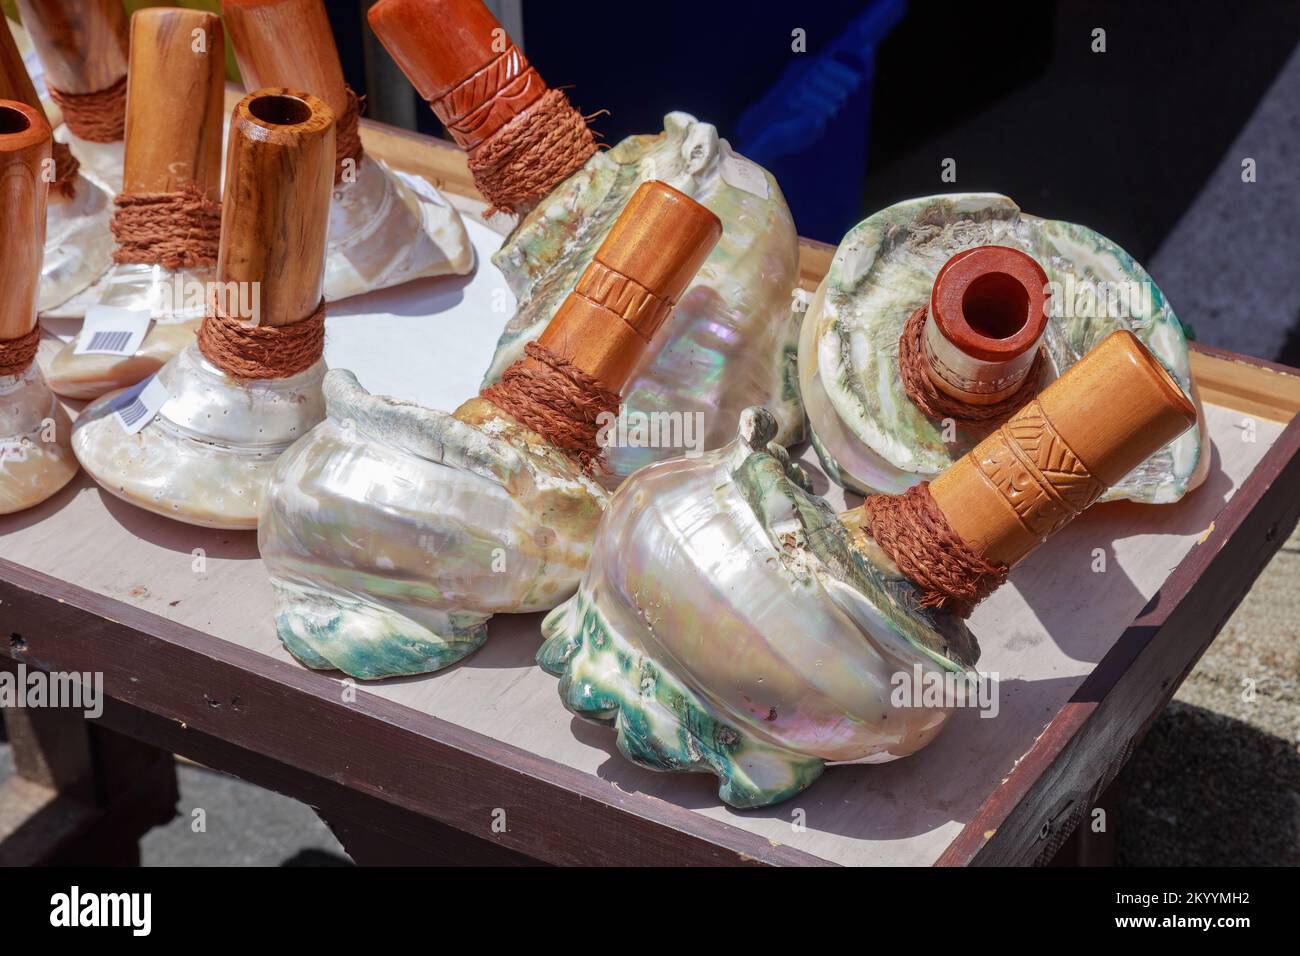 Trumpets made out of trochus (sea snail) shells for sale at a market on the tropical island of Rarotonga, Cook Islands Stock Photo